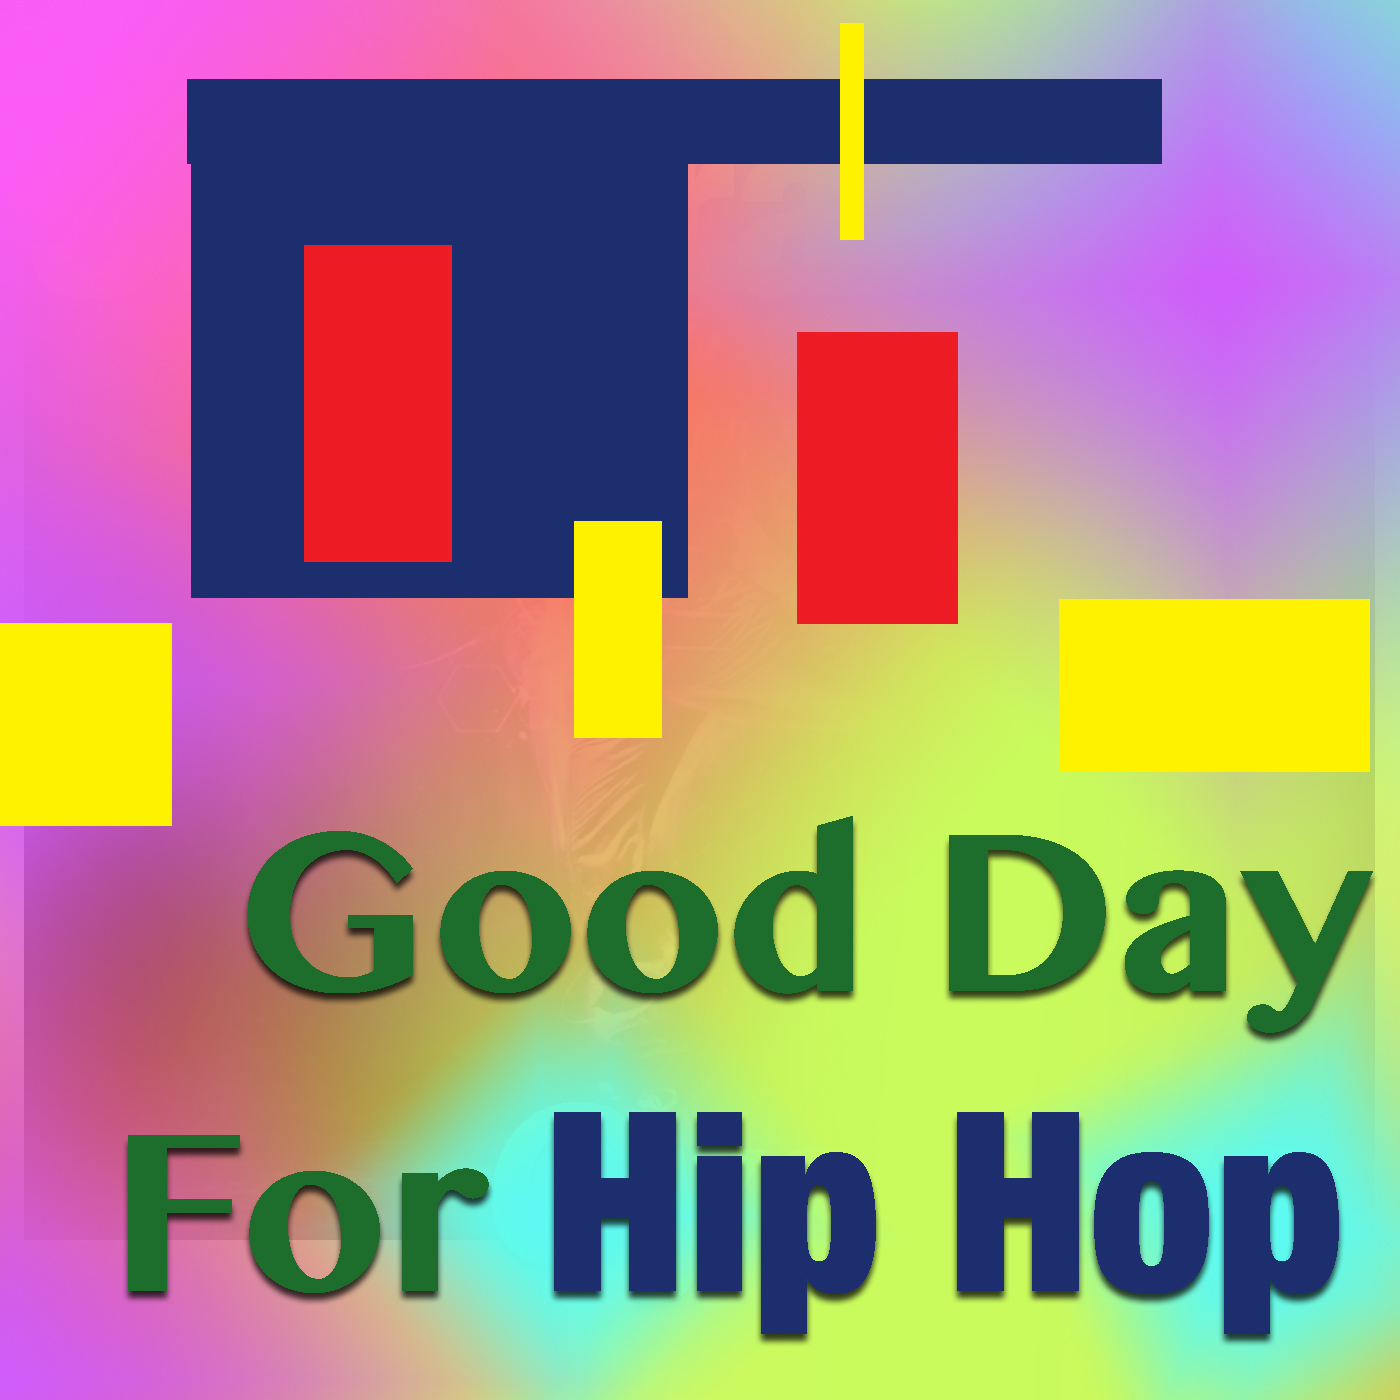 Good Day For Hip Hop